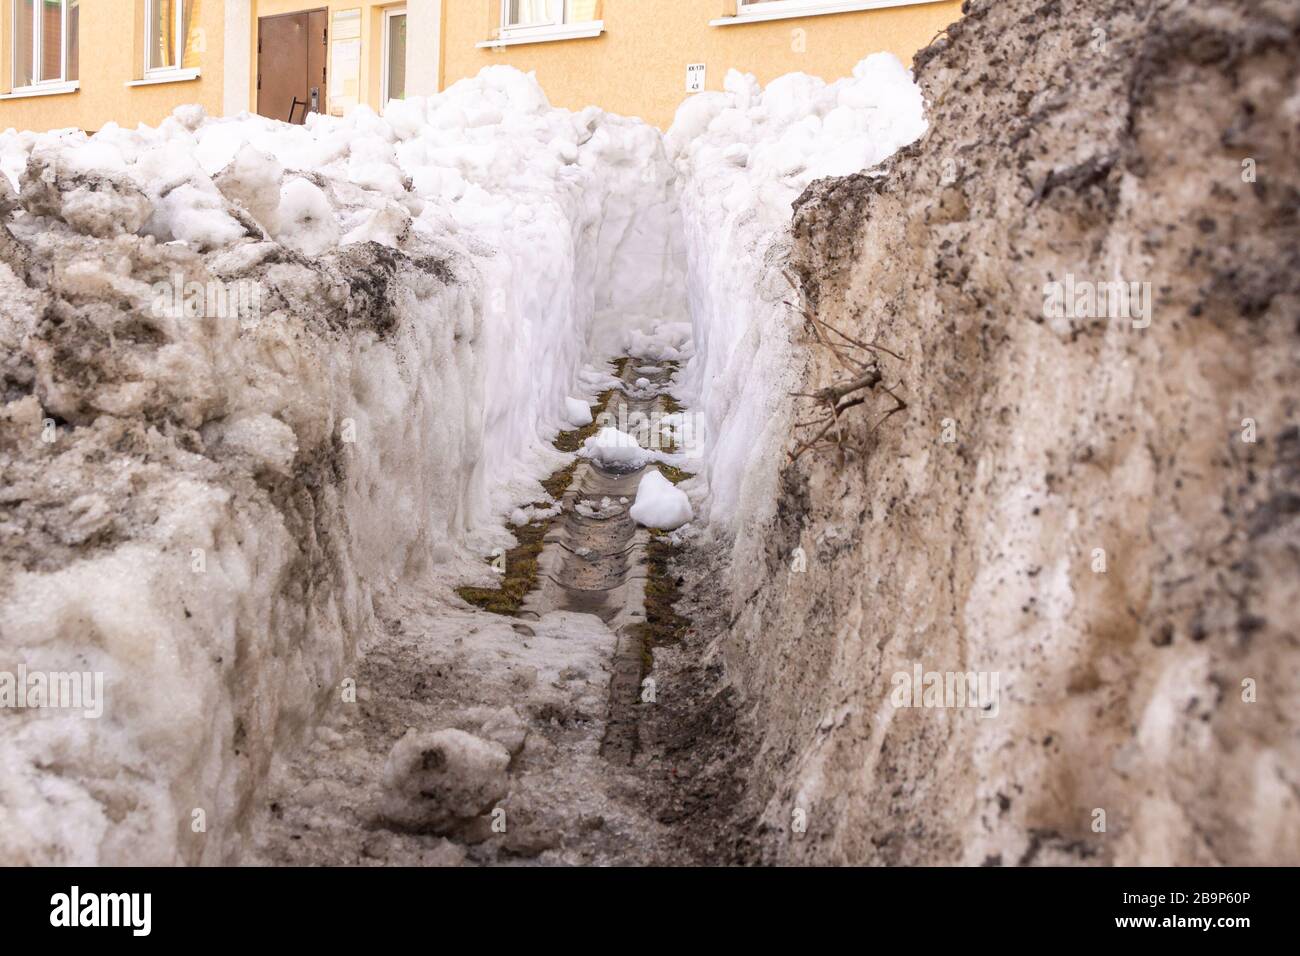 cleaning the gutter from wet and darkened snow in the spring to divert the flow of meltwater from the building Stock Photo